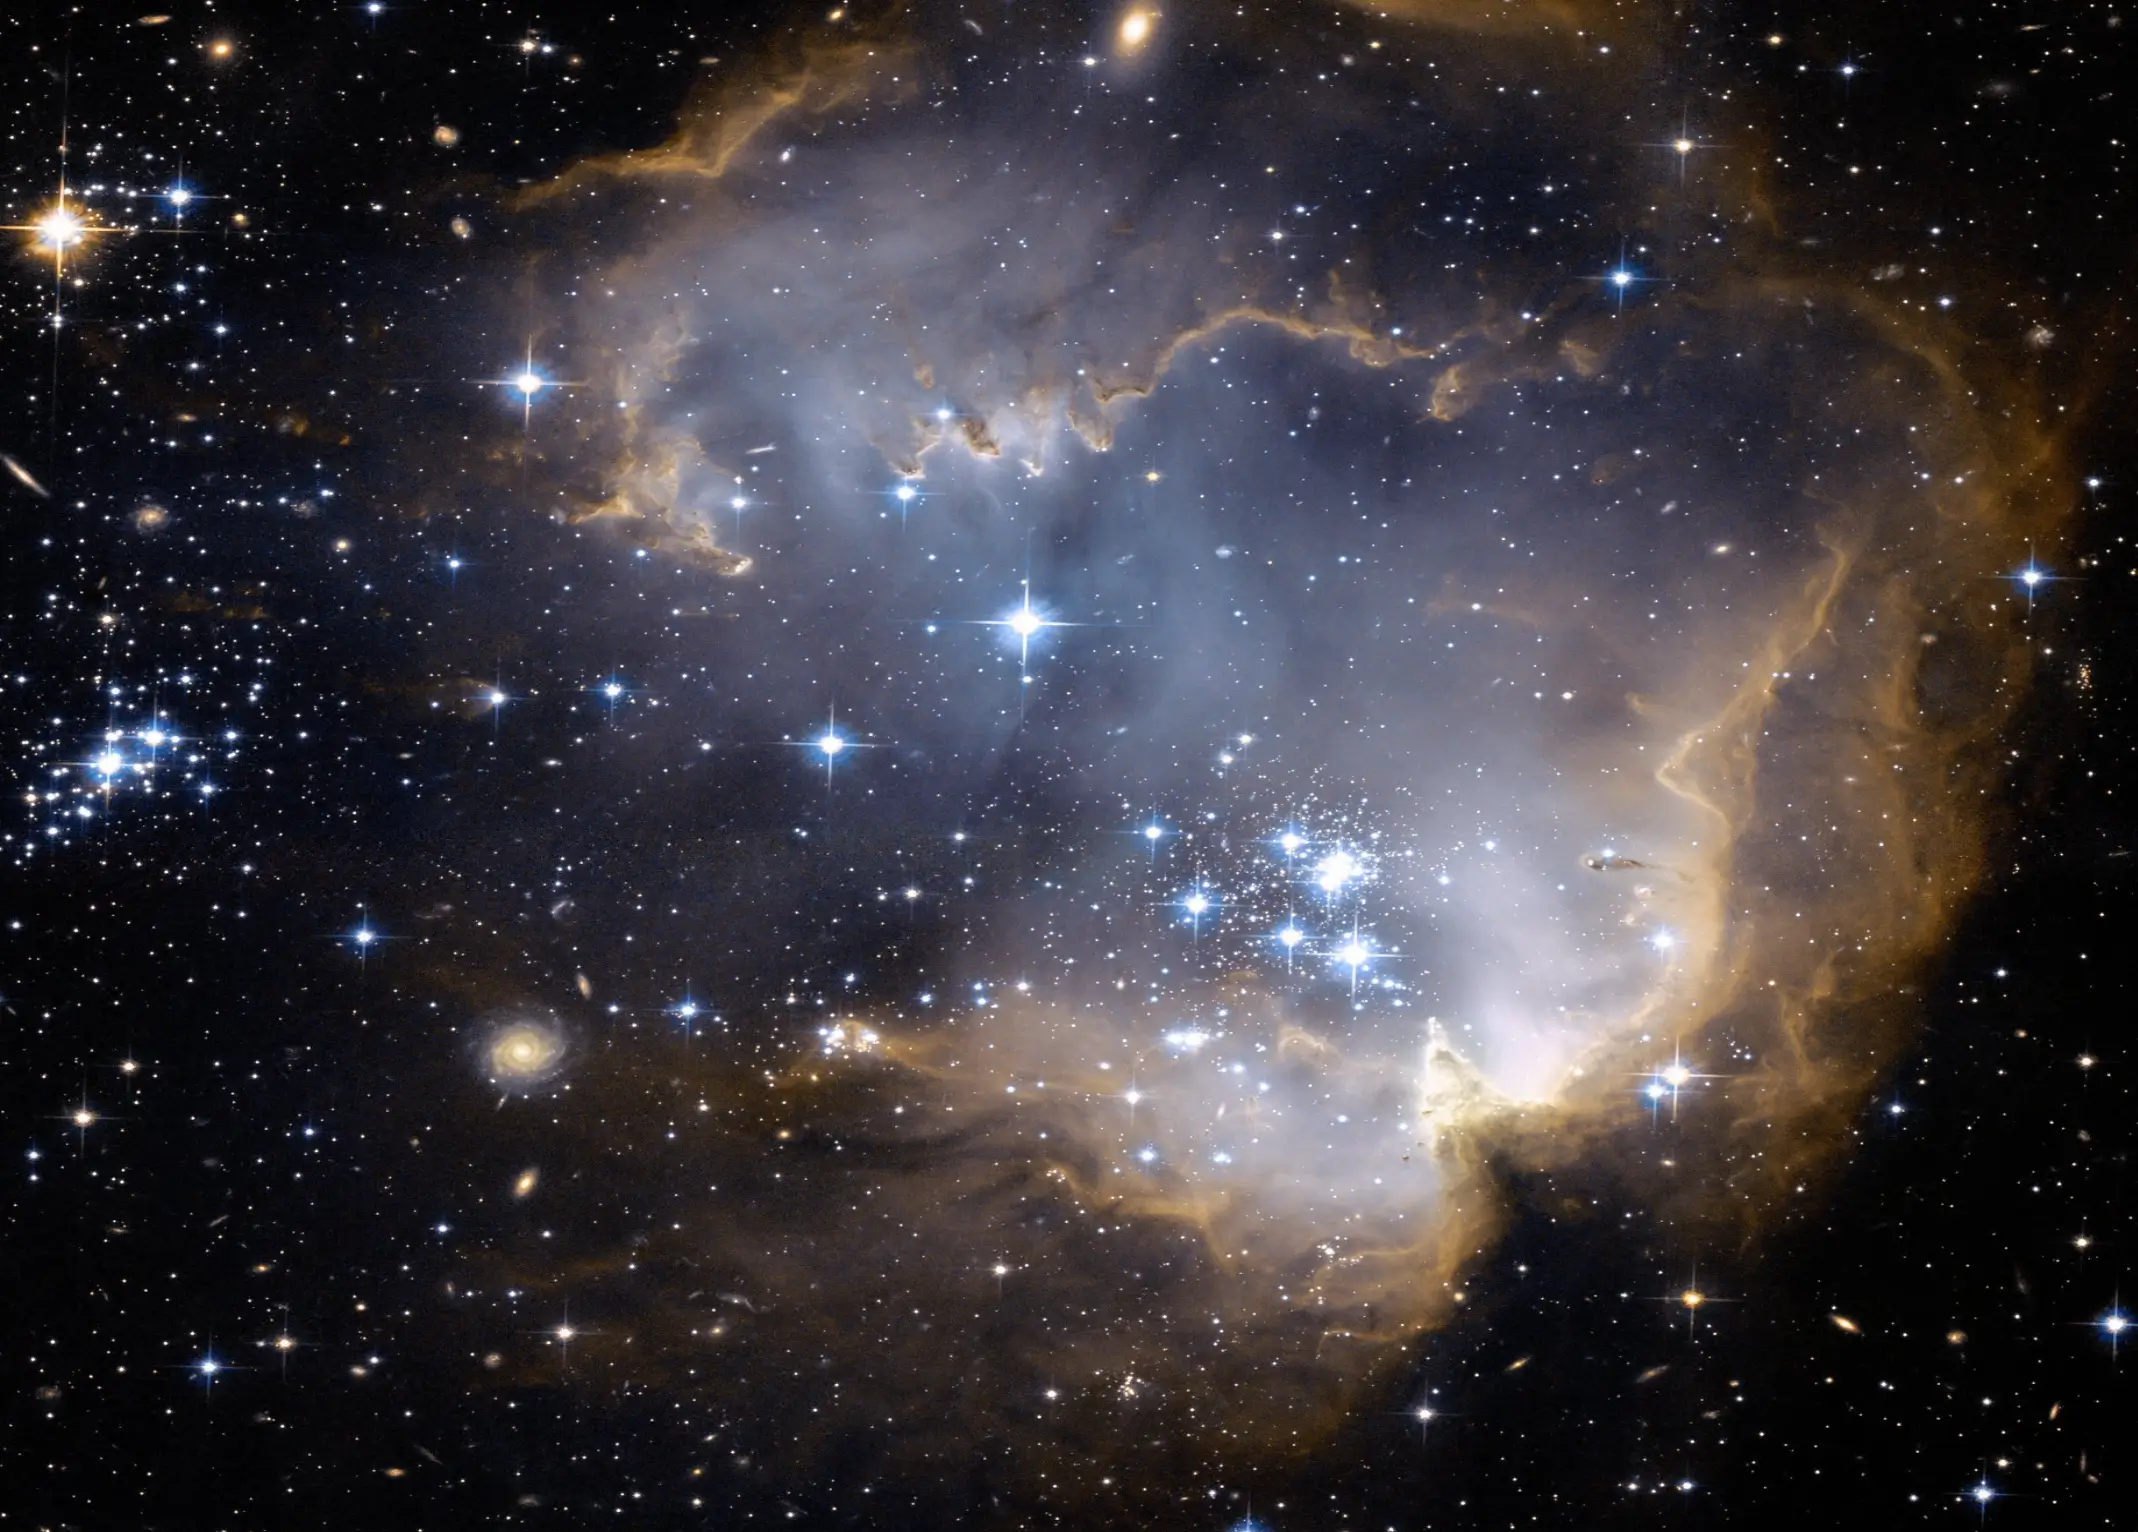 Image of Cluster of stars to represent Janma Nakshatra or Birth Star in Astrology. The connection of the Moon with us.